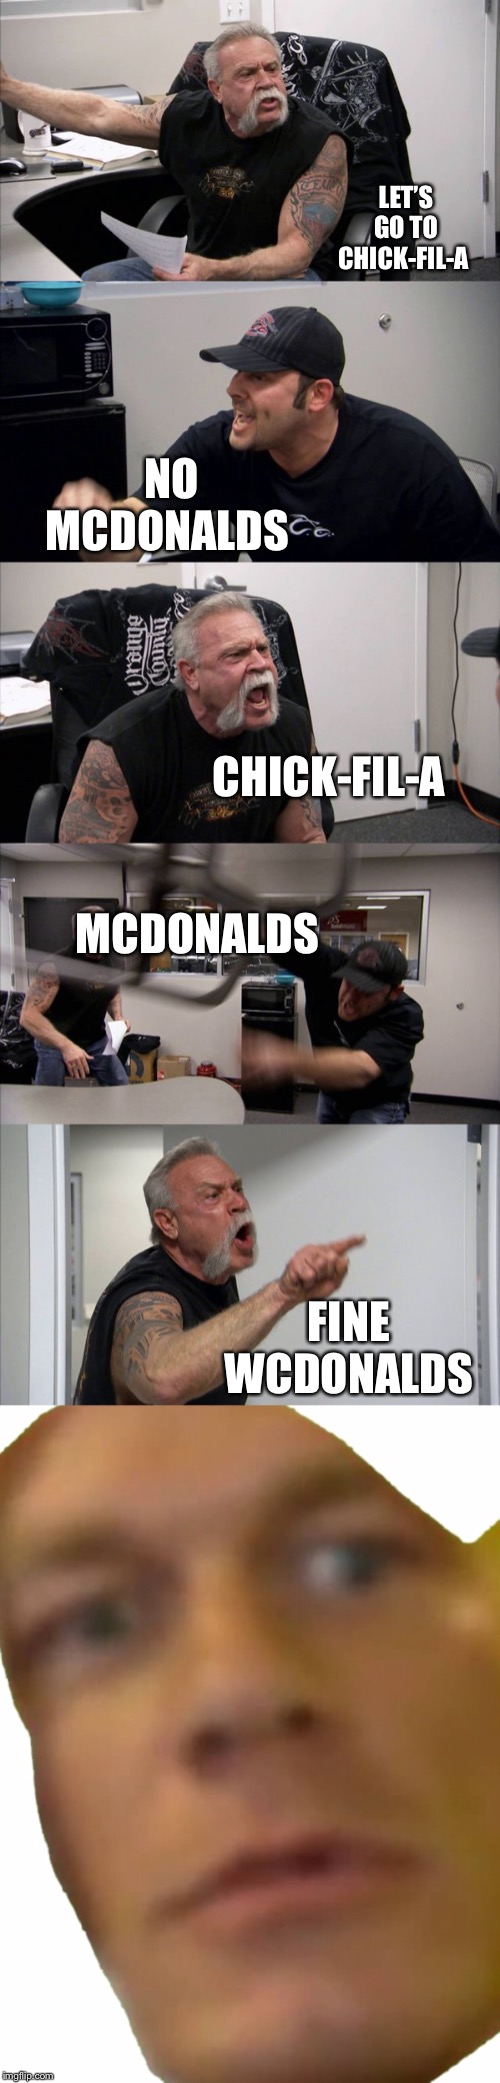 NO MCDONALDS; LET’S GO TO CHICK-FIL-A; CHICK-FIL-A; MCDONALDS; FINE WCDONALDS | image tagged in memes,american chopper argument | made w/ Imgflip meme maker